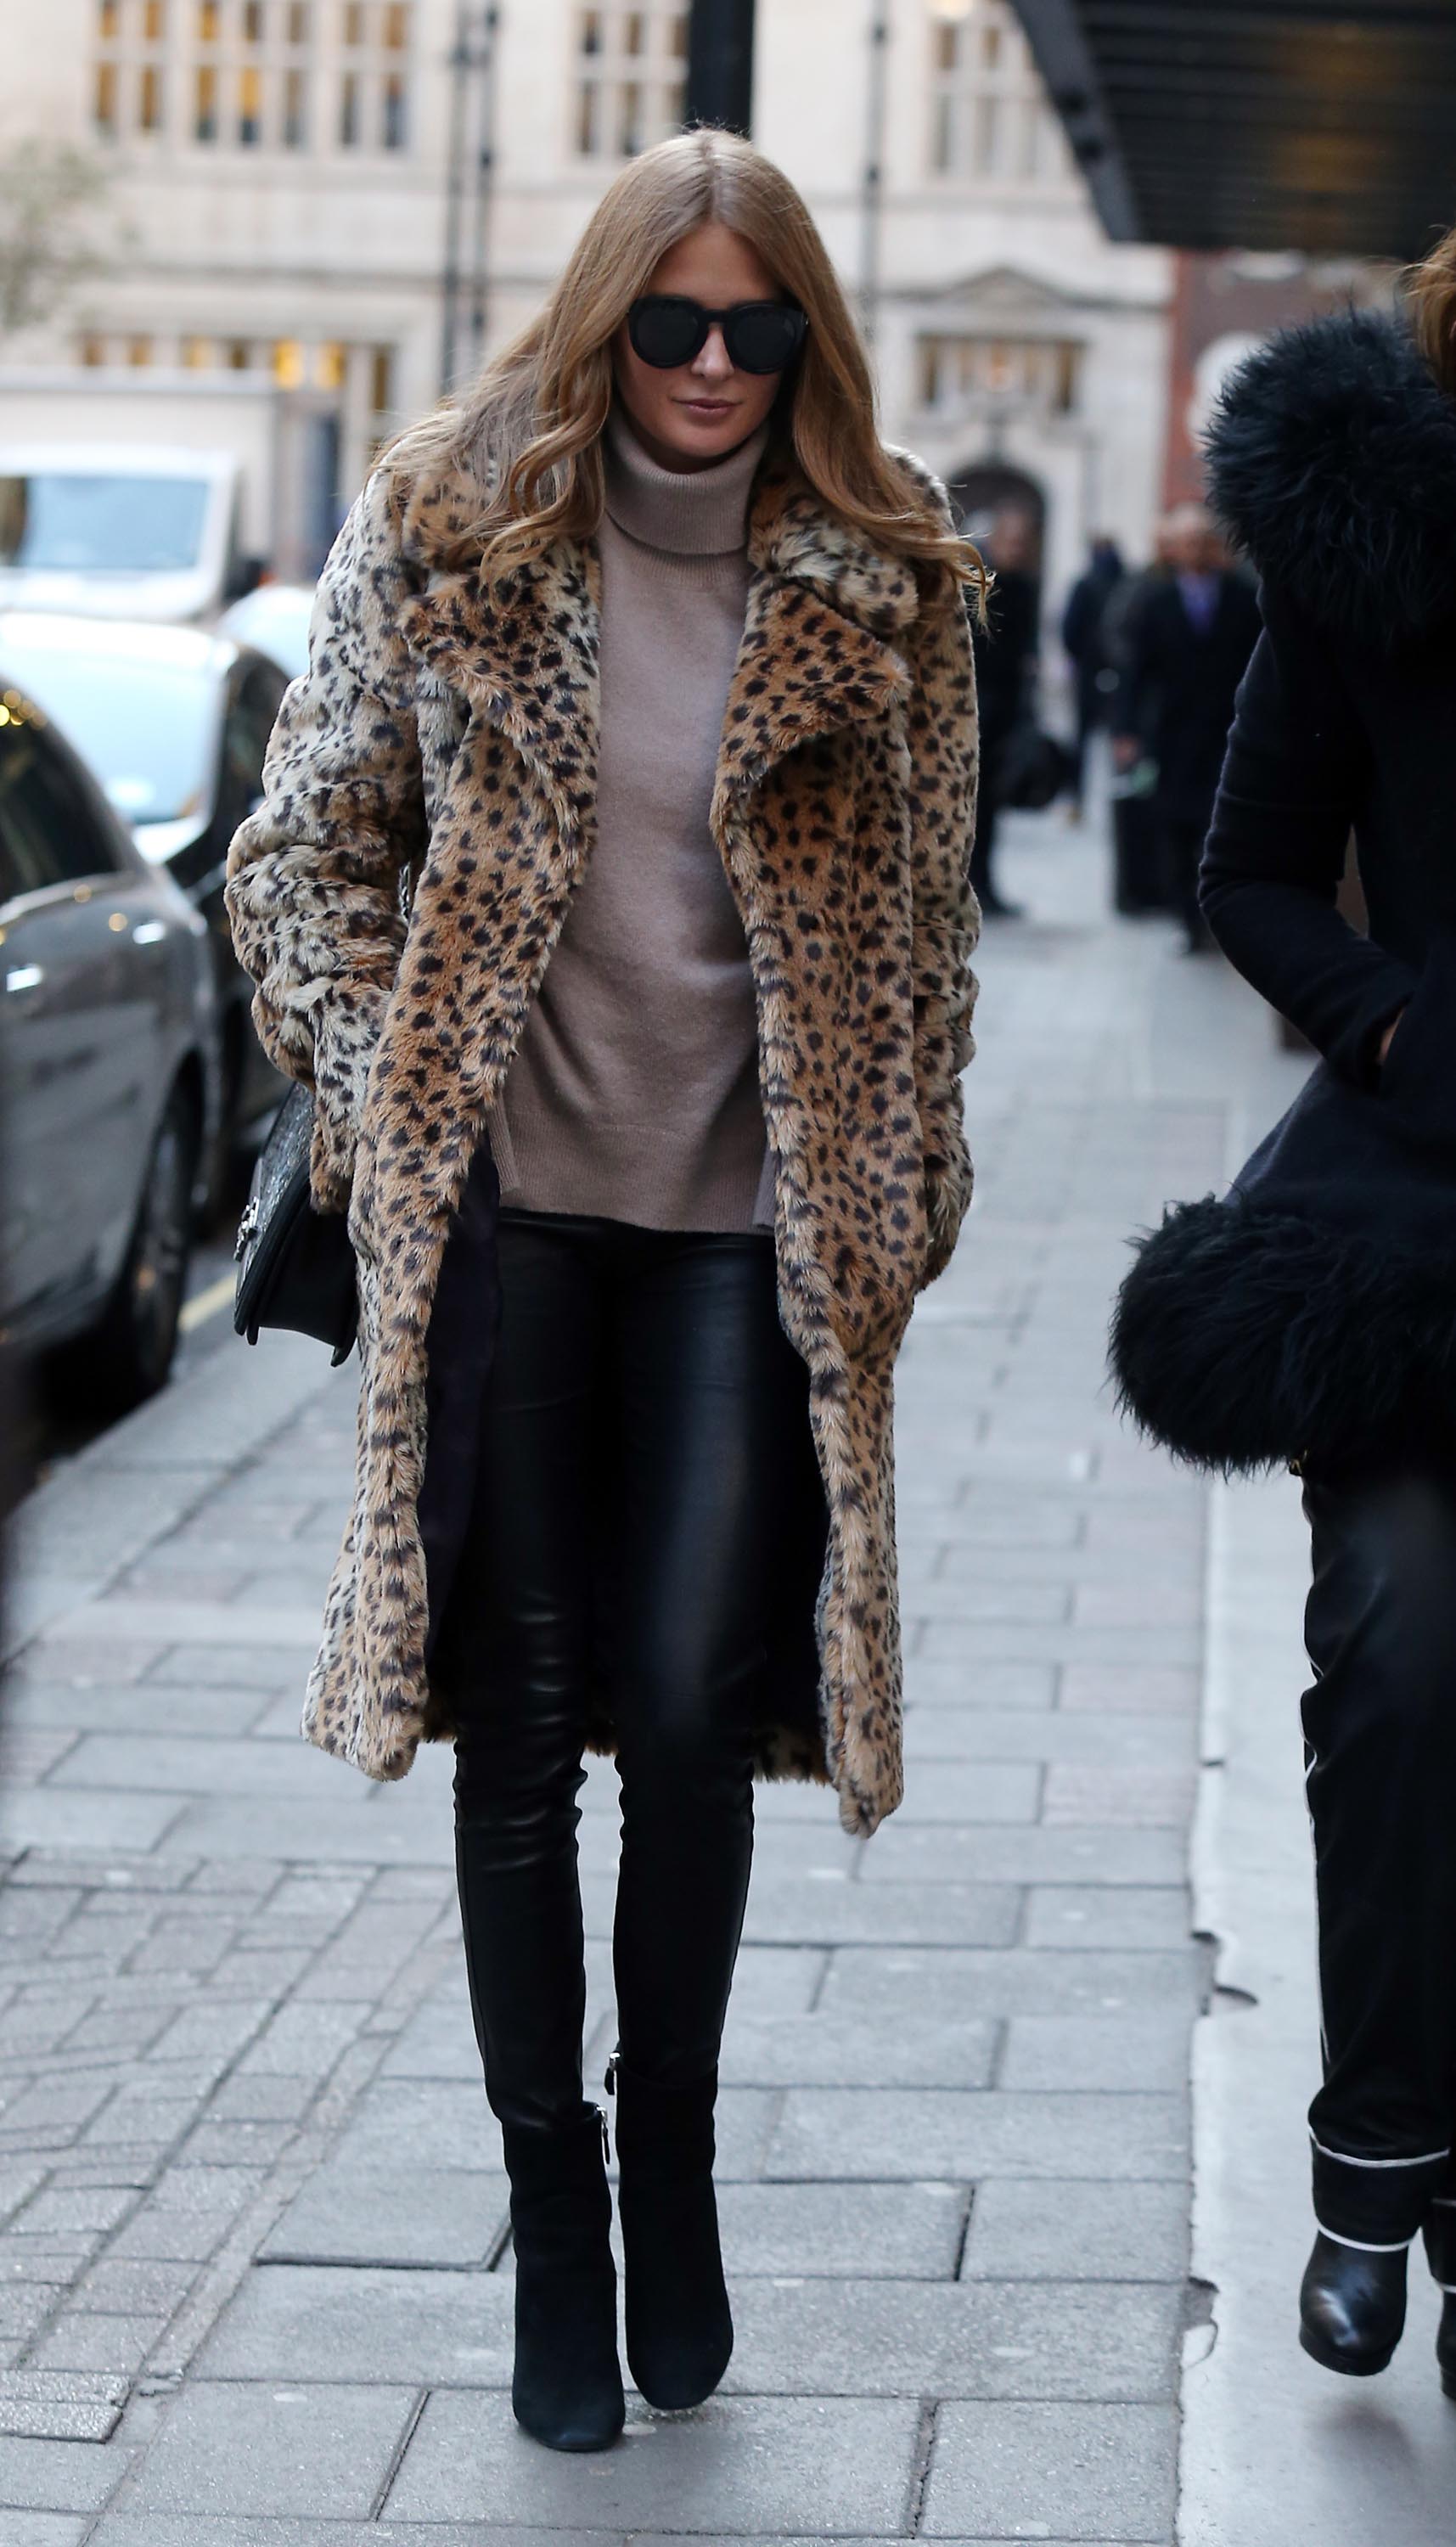 Millie Mackintosh seen leaving the May Fair Hotel